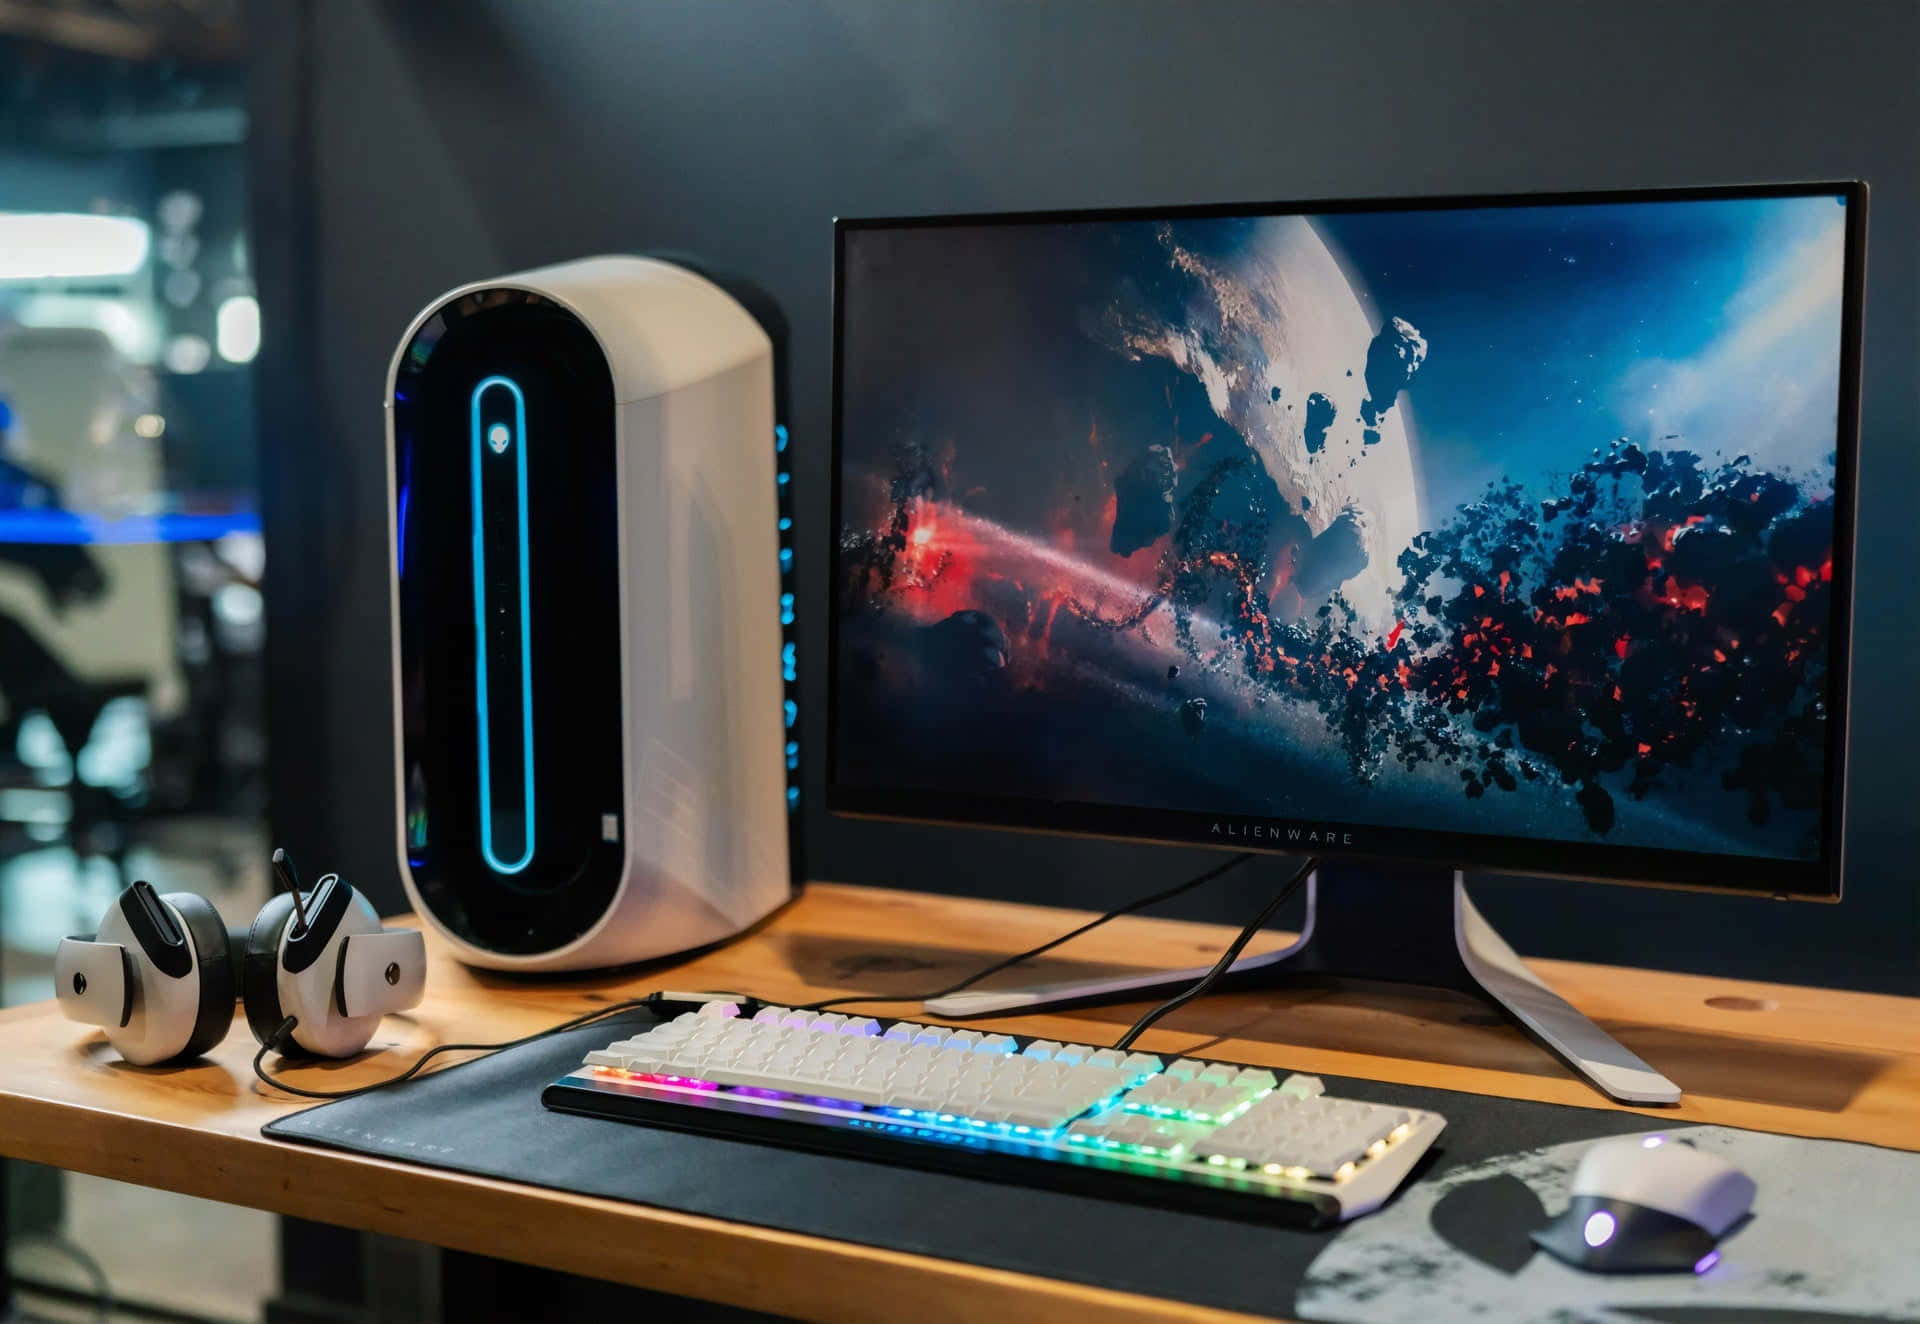 Enjoy a seamless gaming experience with this one of a kind gaming PC setup Wallpaper